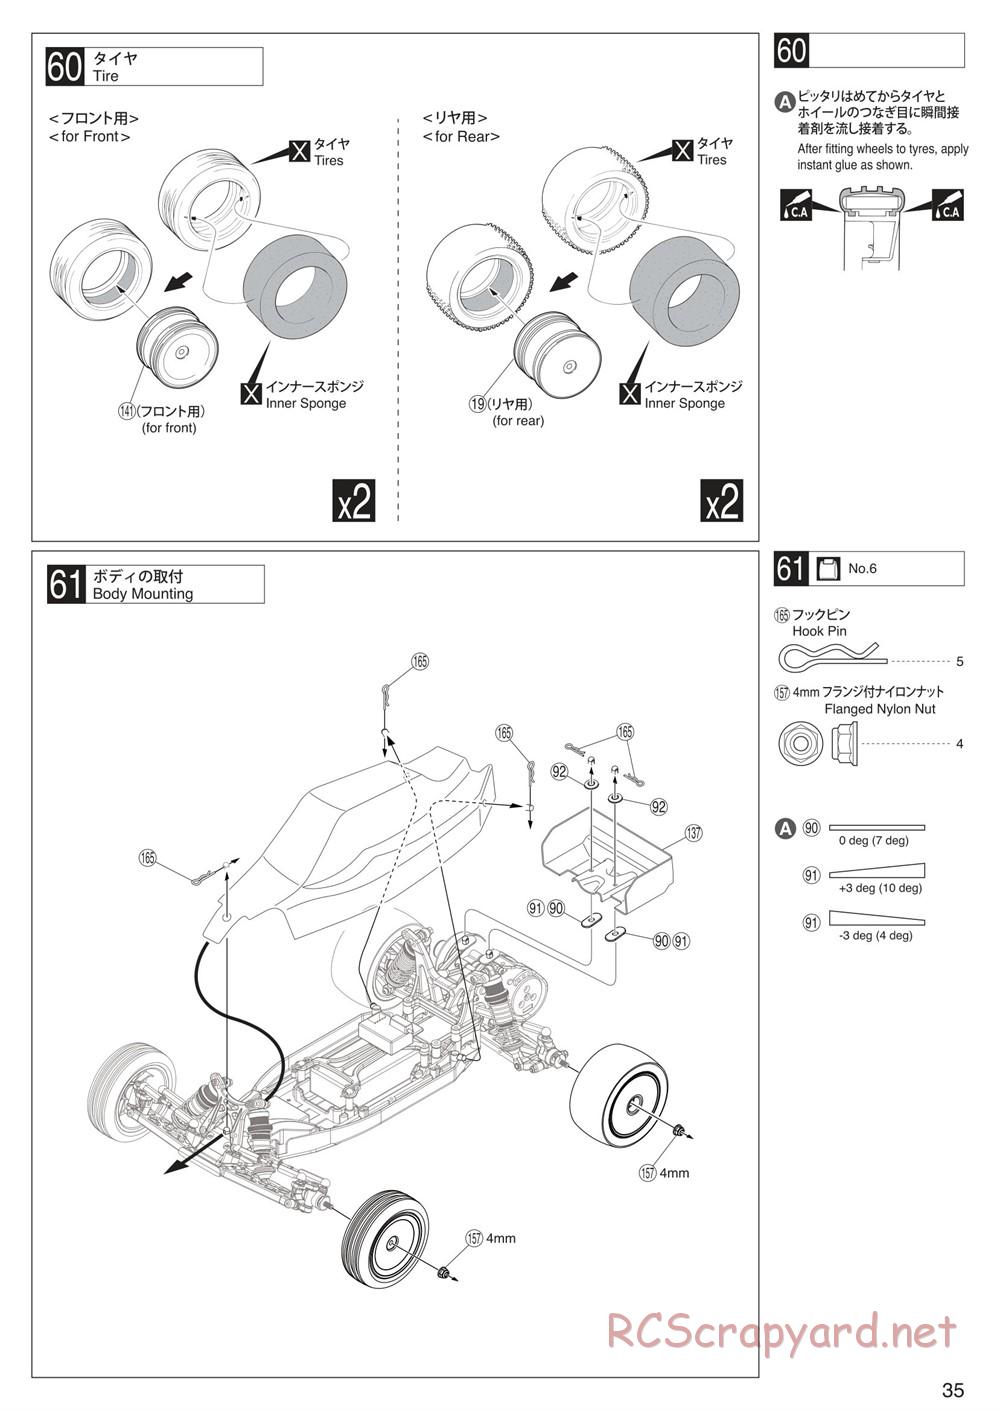 Kyosho - Ultima RB6 - Manual - Page 35